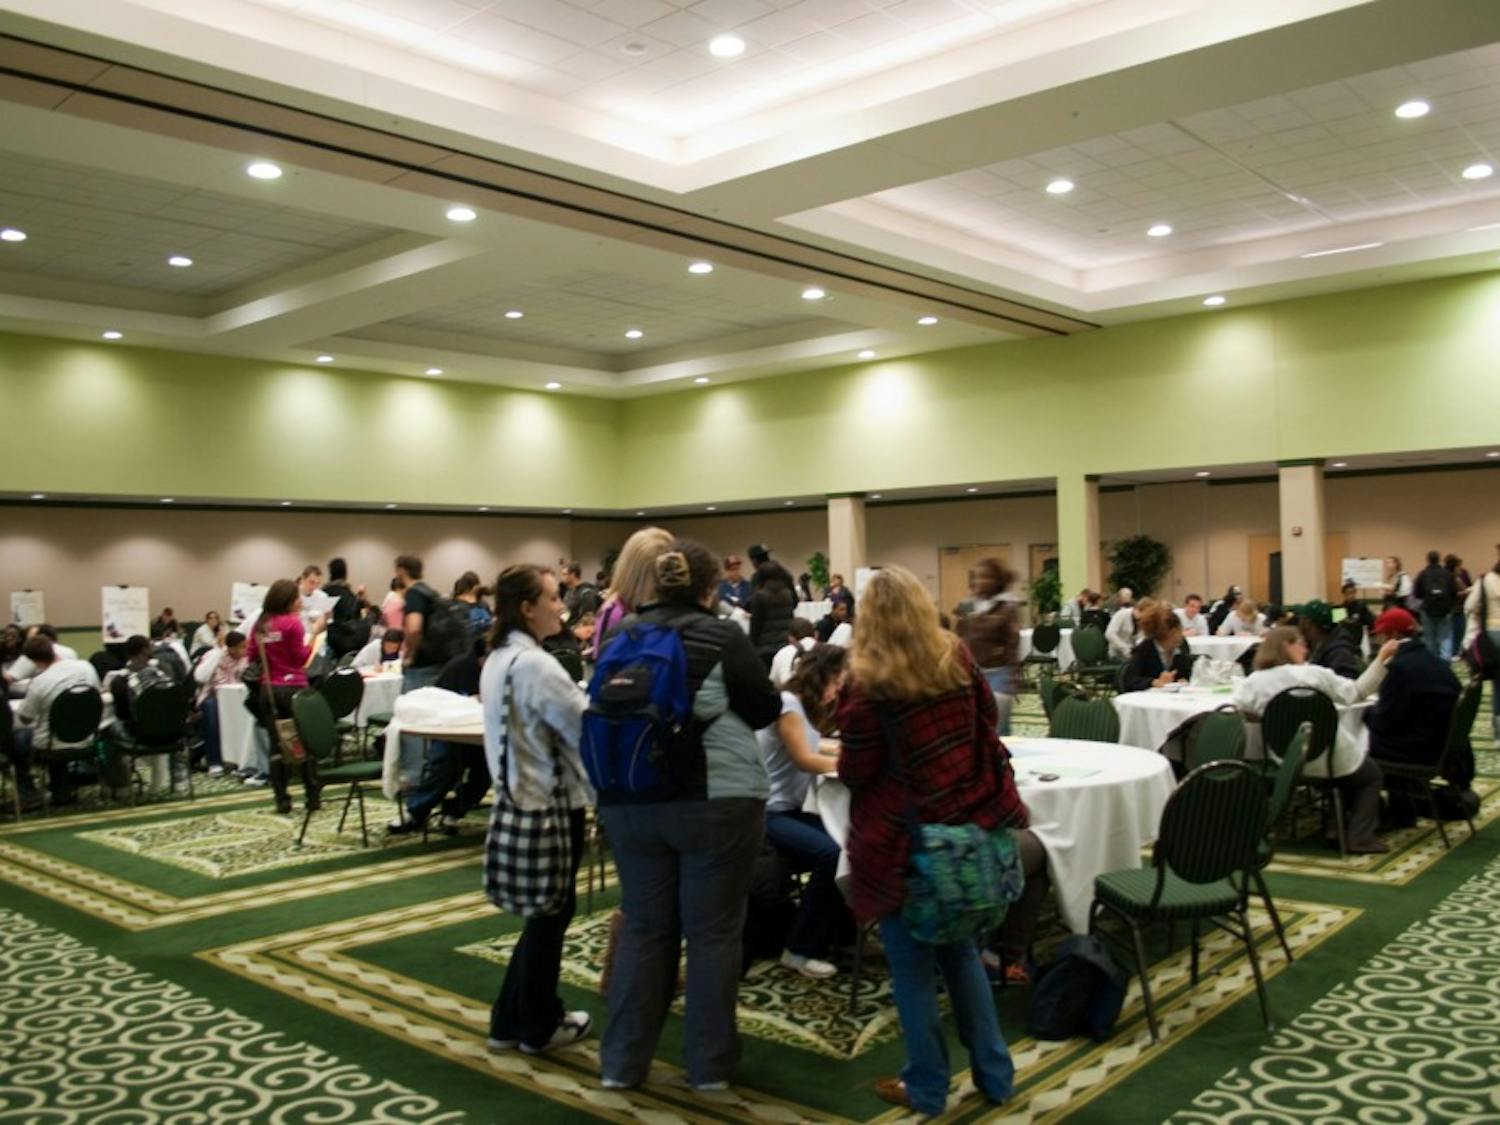 National Day on Writing was hosted in the Student Center Ballroom.